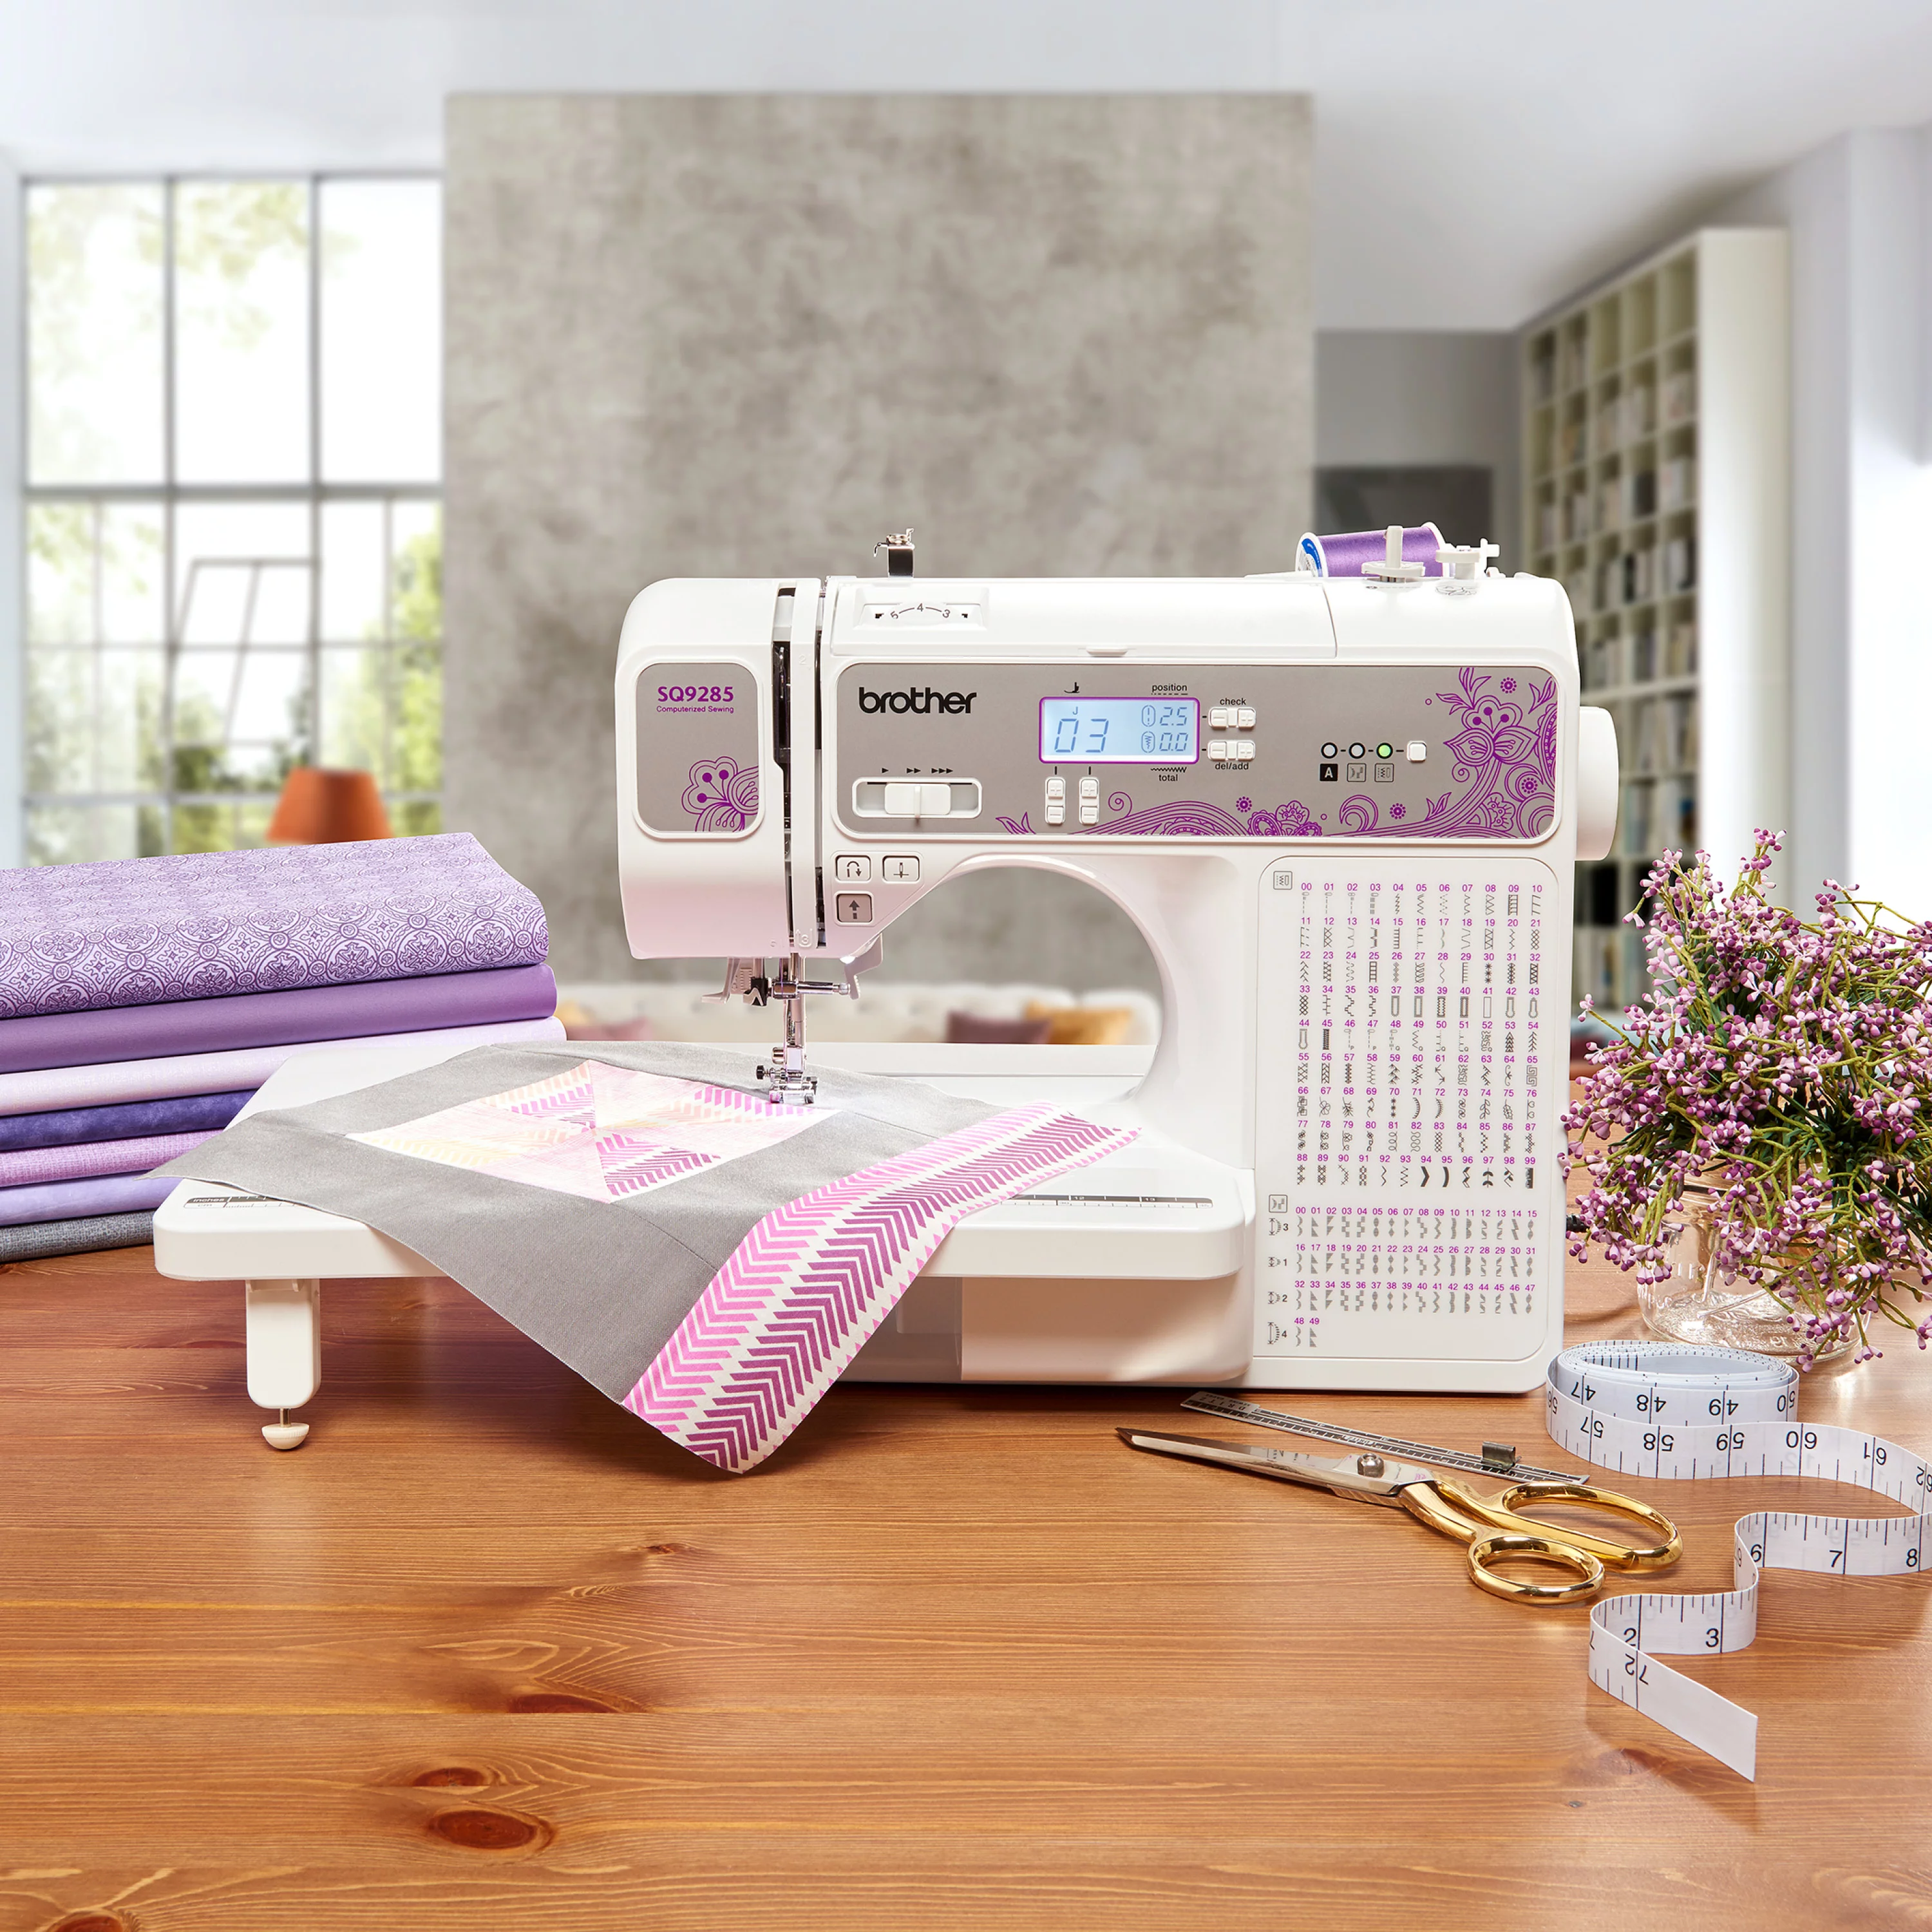 Brother sq9285 Best Review – Be Ready for Next-Level Sewing